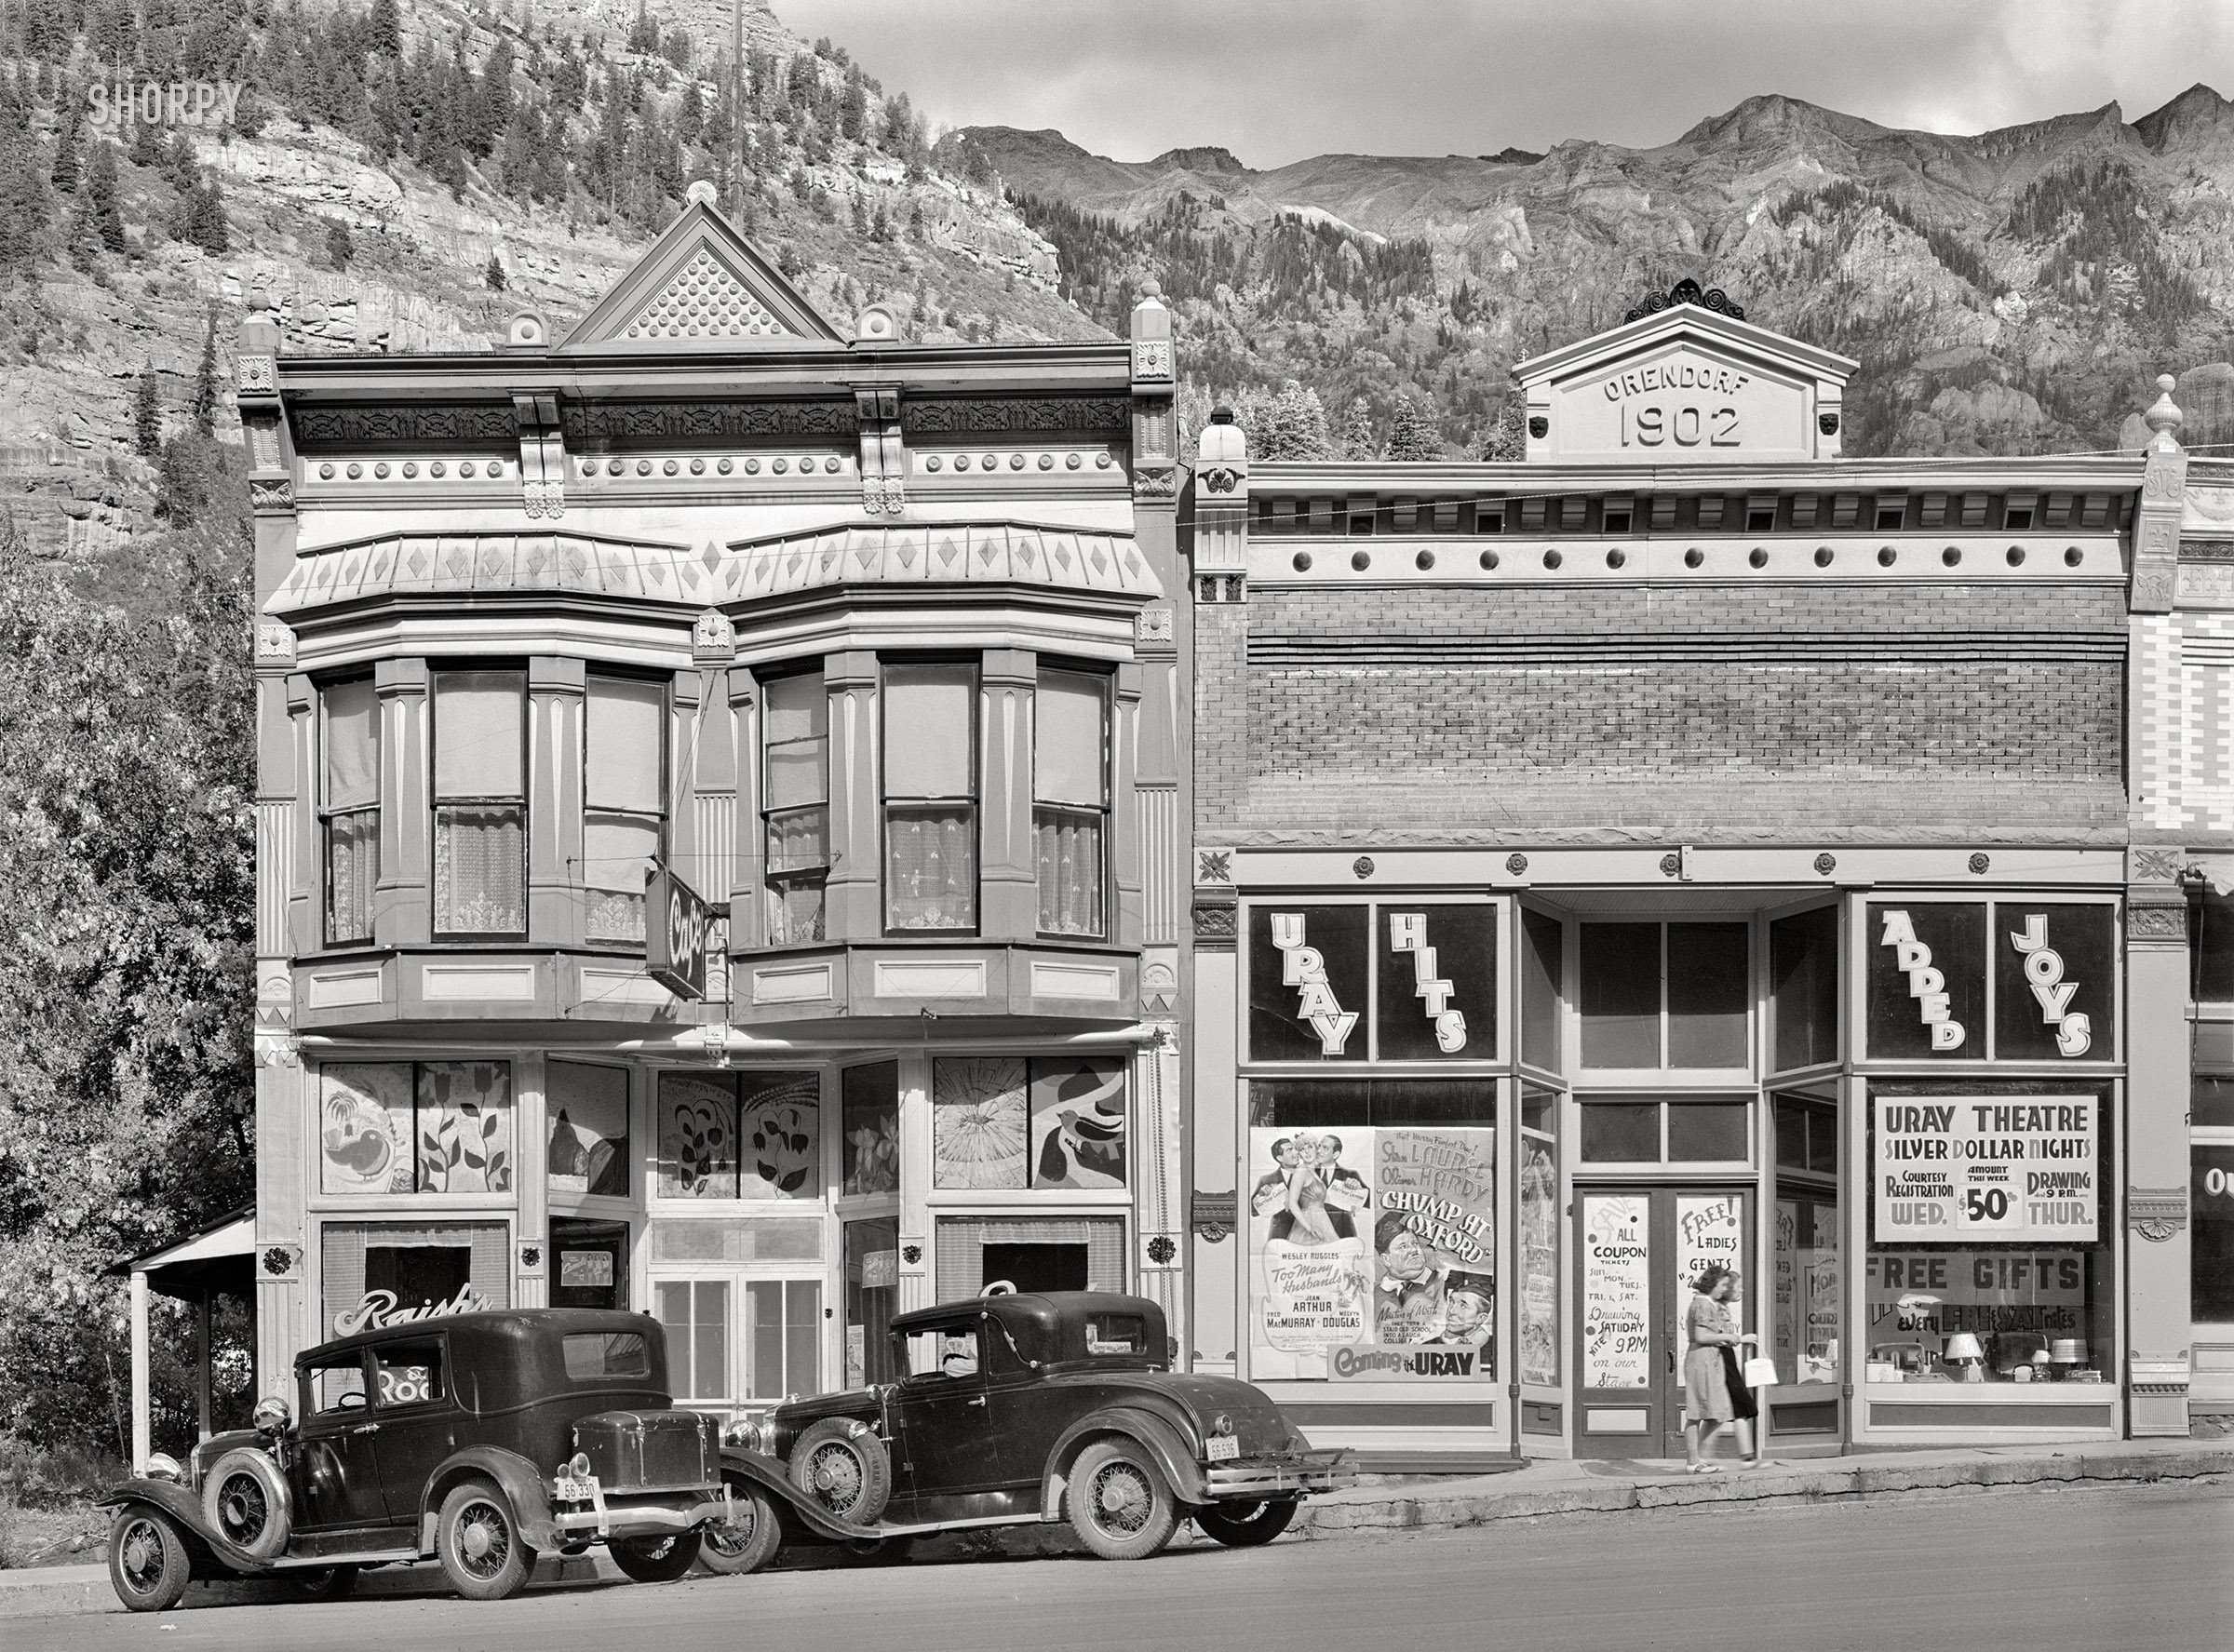 September 1940. Ouray, Colorado. "Store building. Ouray is the center of a gold mining region and is developing as a tourist center." A continuation of the storefronts last seen here, and a sequel to that other Uray Theatre. Acetate negative by Russell Lee. View full size.